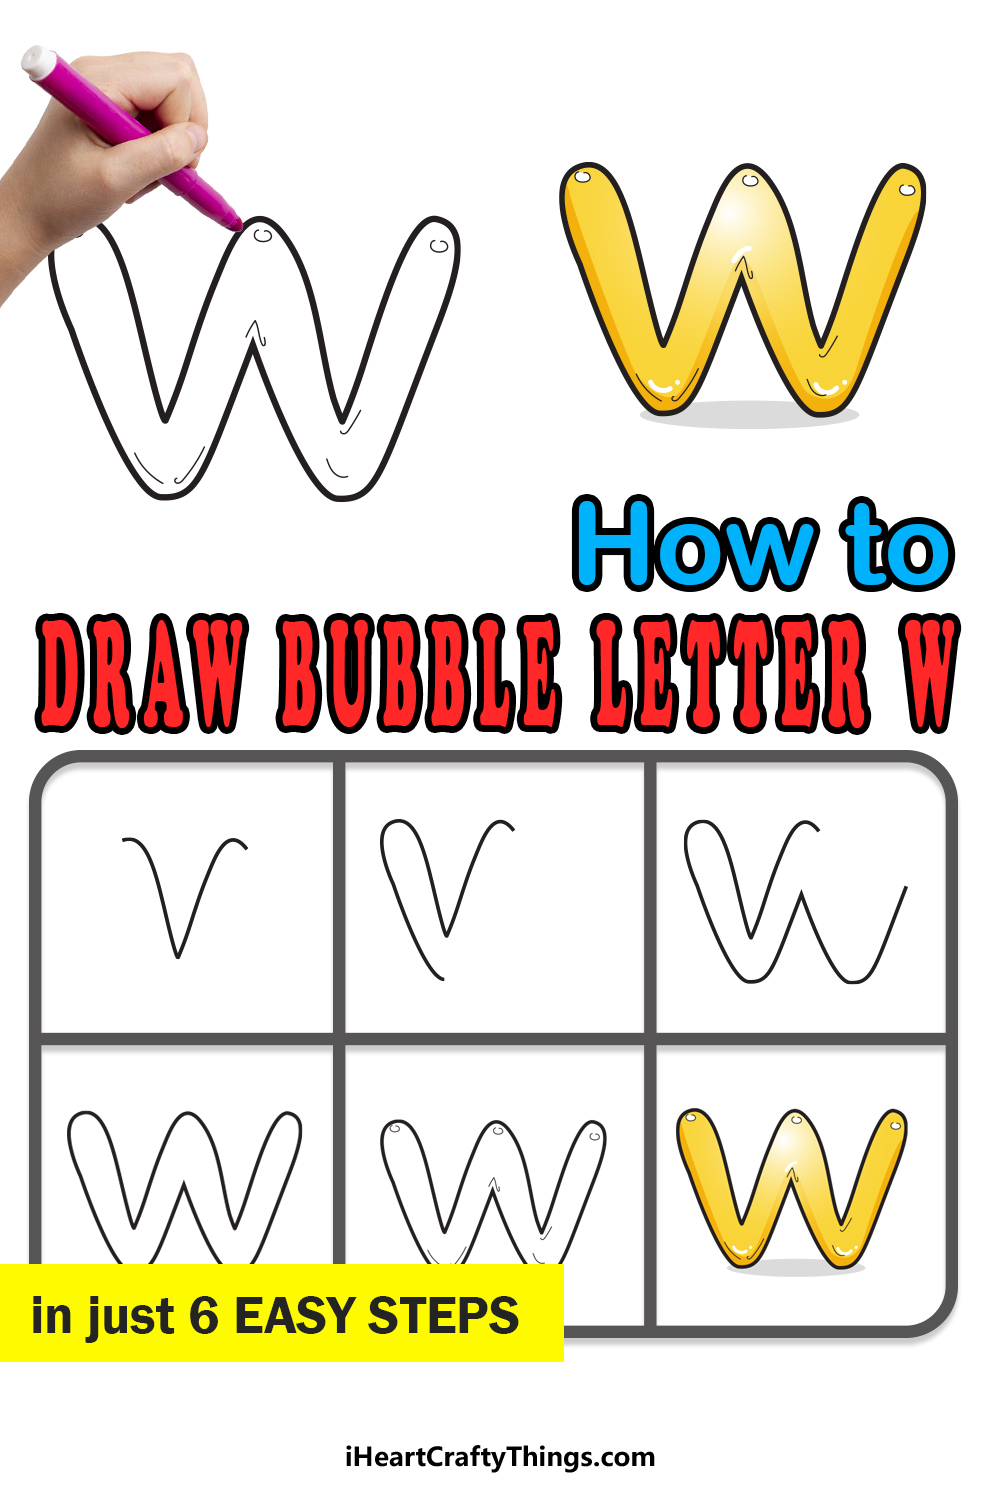 How To Draw Your Own Bubble W step by step guide